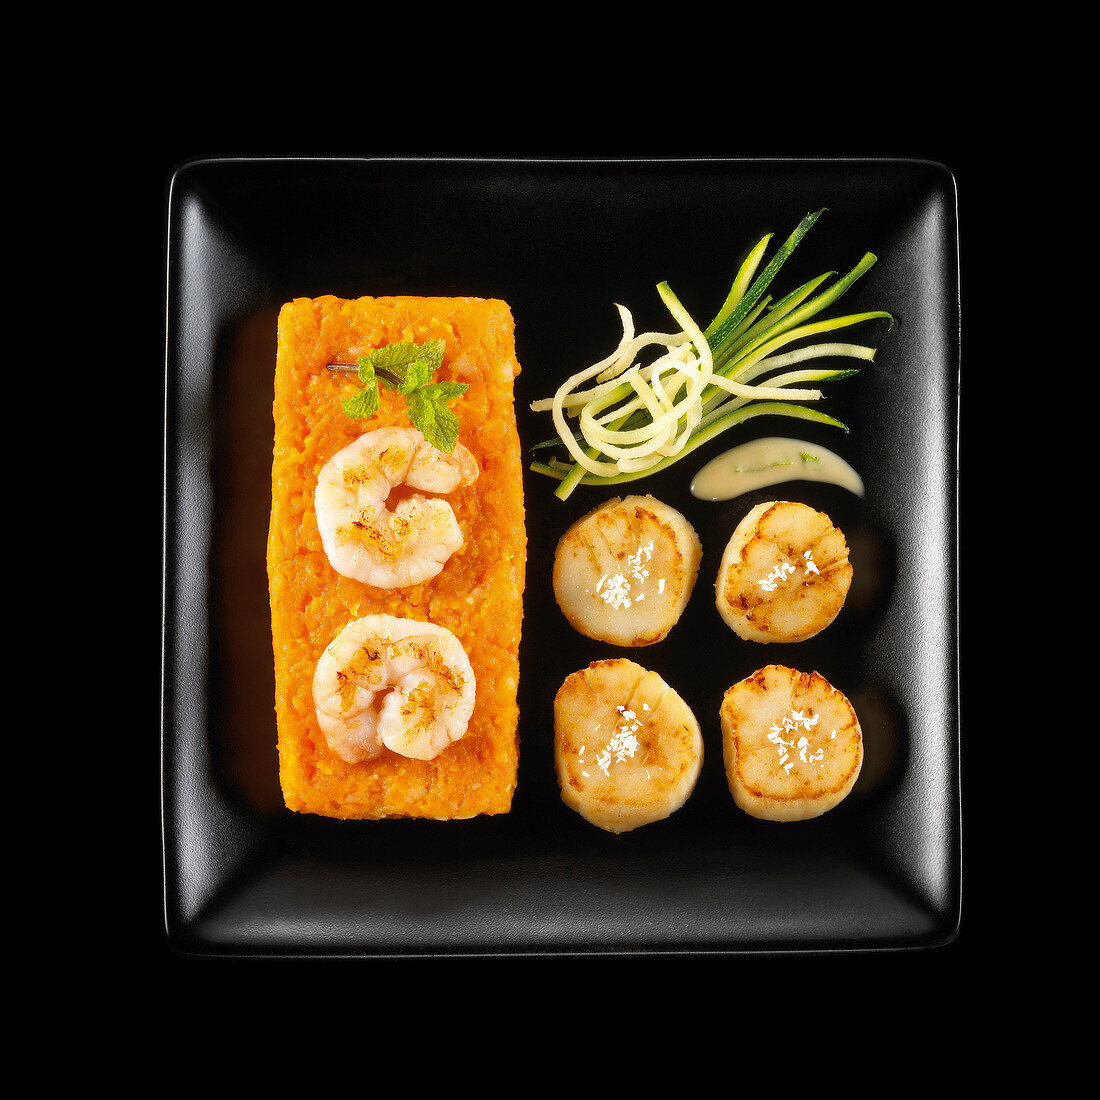 Roasted scallops,carrot mash with king prawns on a black background